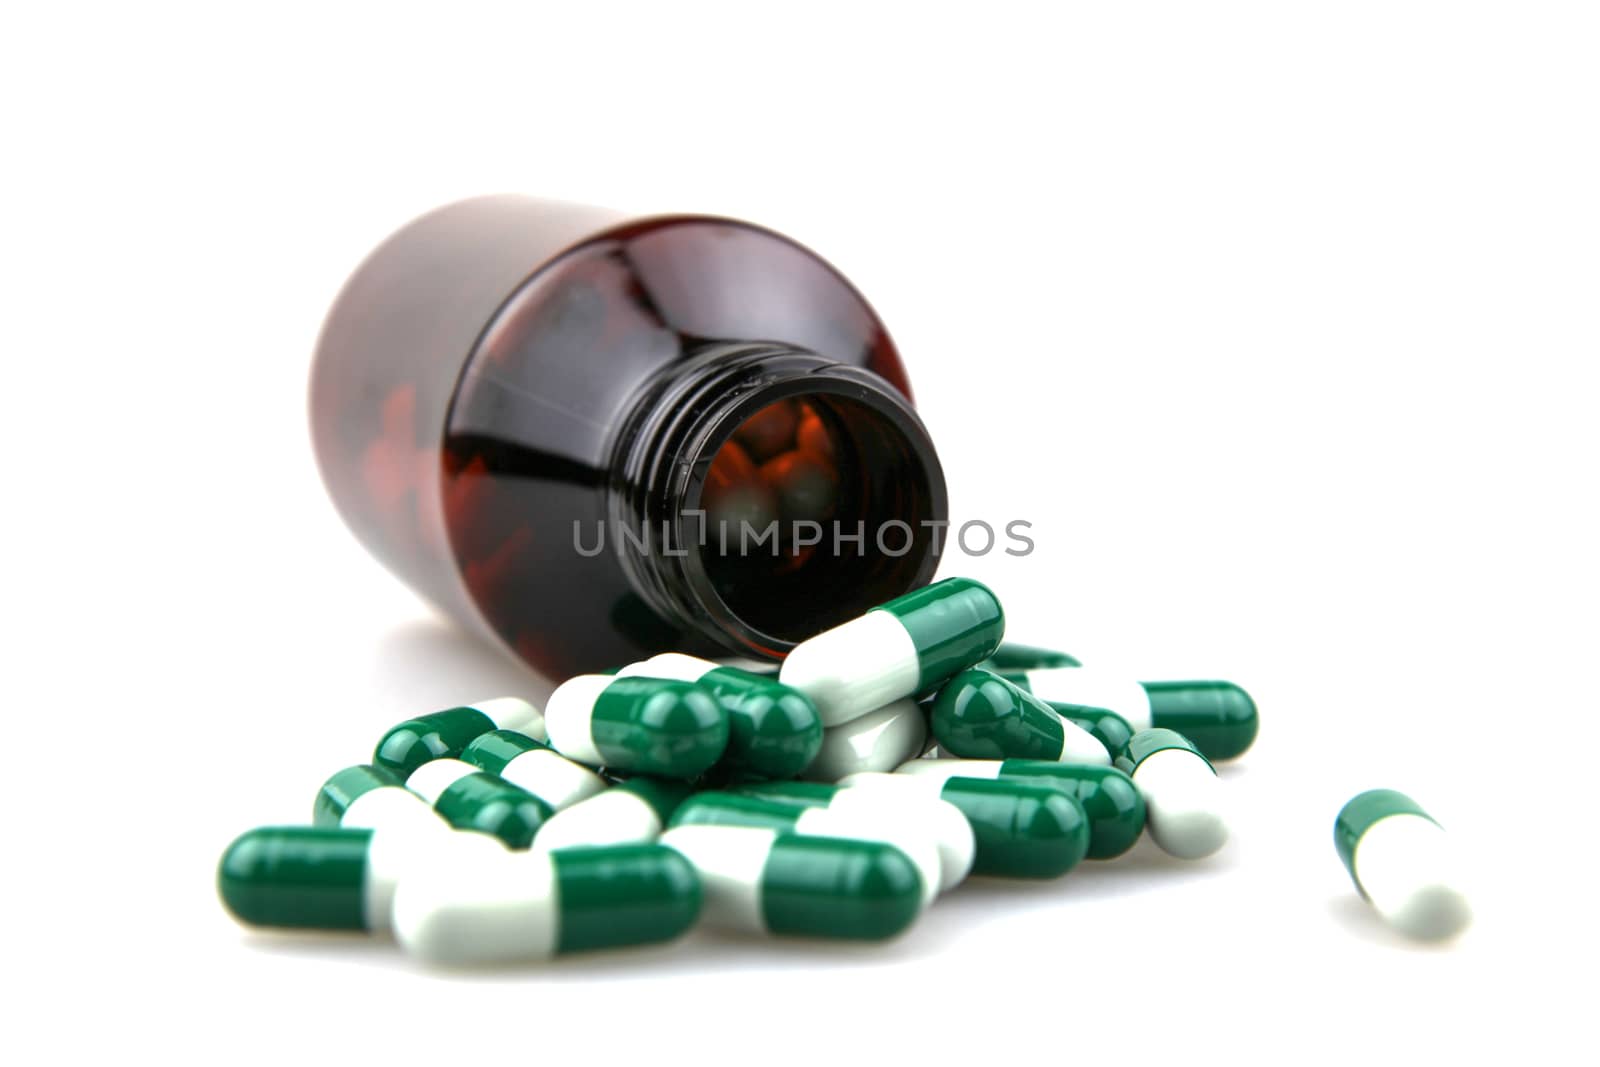 Pill bottle with medications over white background